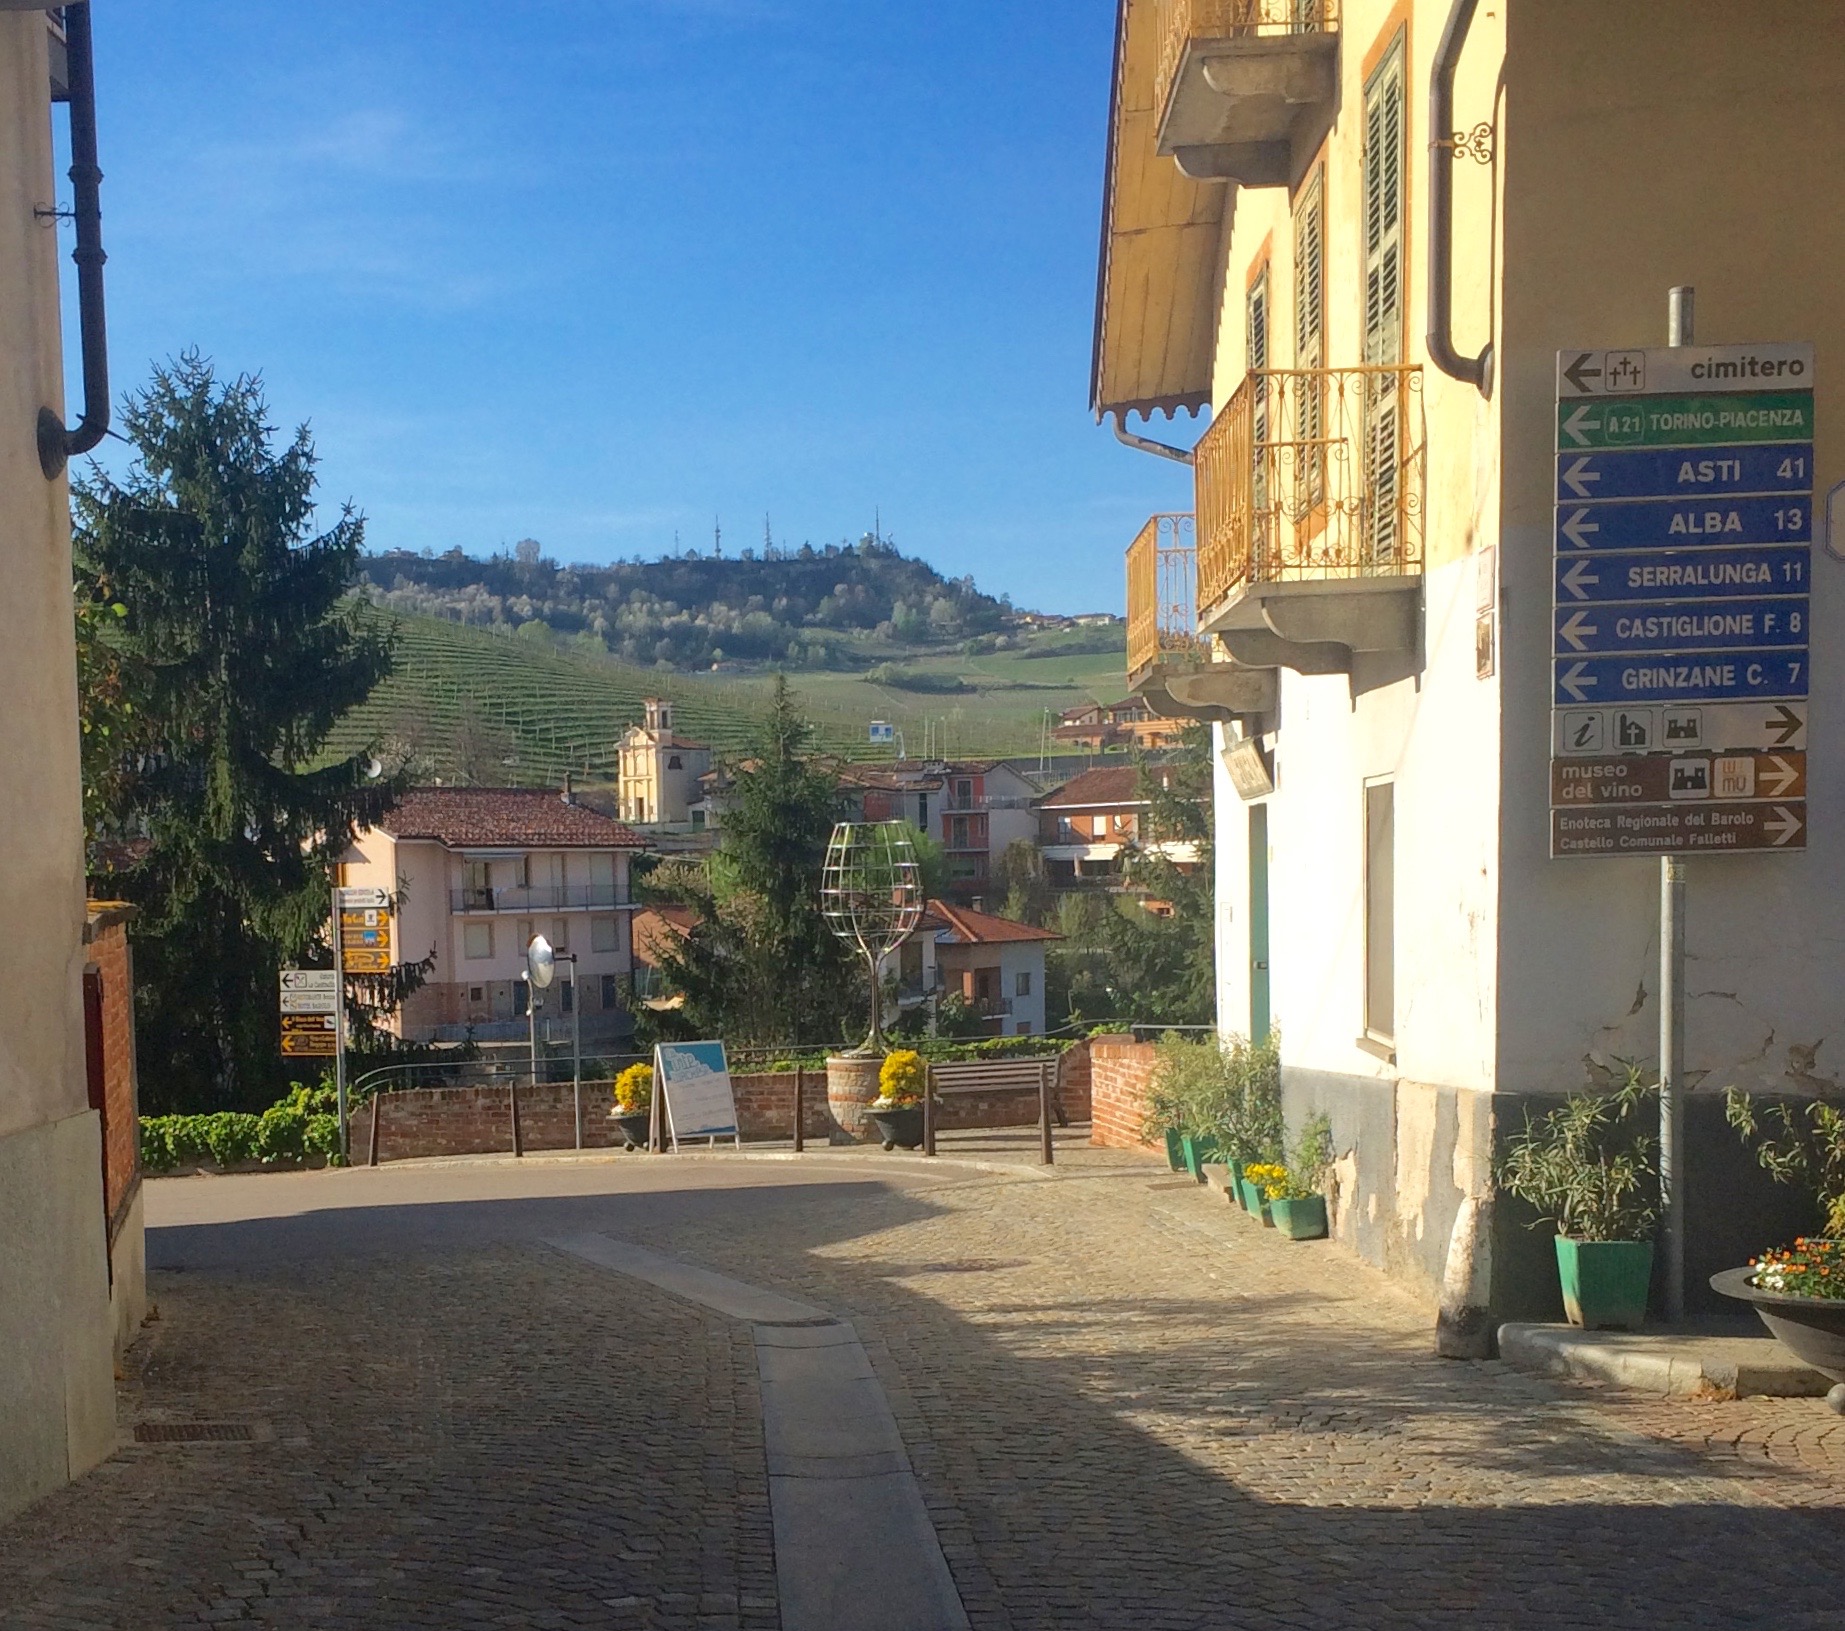 Strolling through the streets of Barolo.